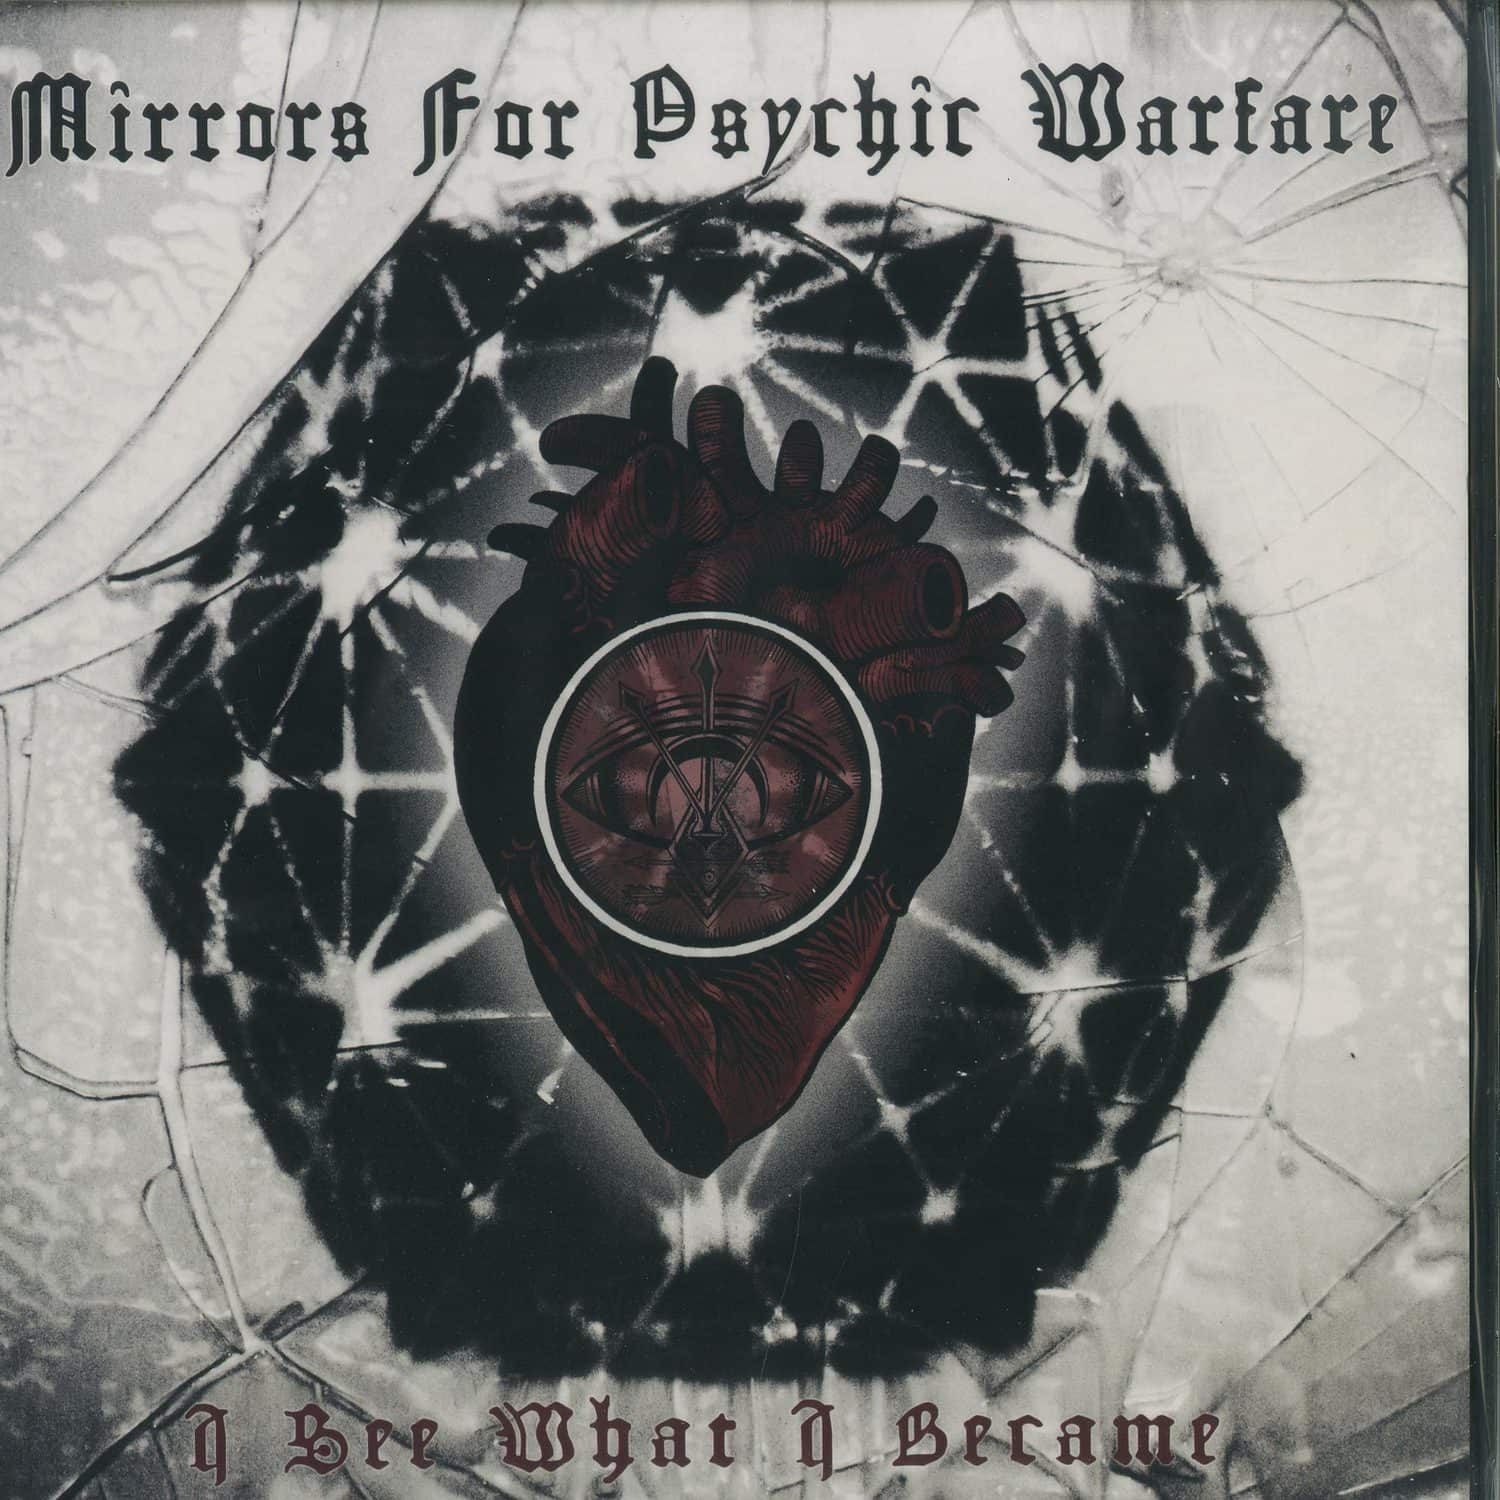 Mirrors For Psychic Warfare - I SEE WHAT I BECAME 